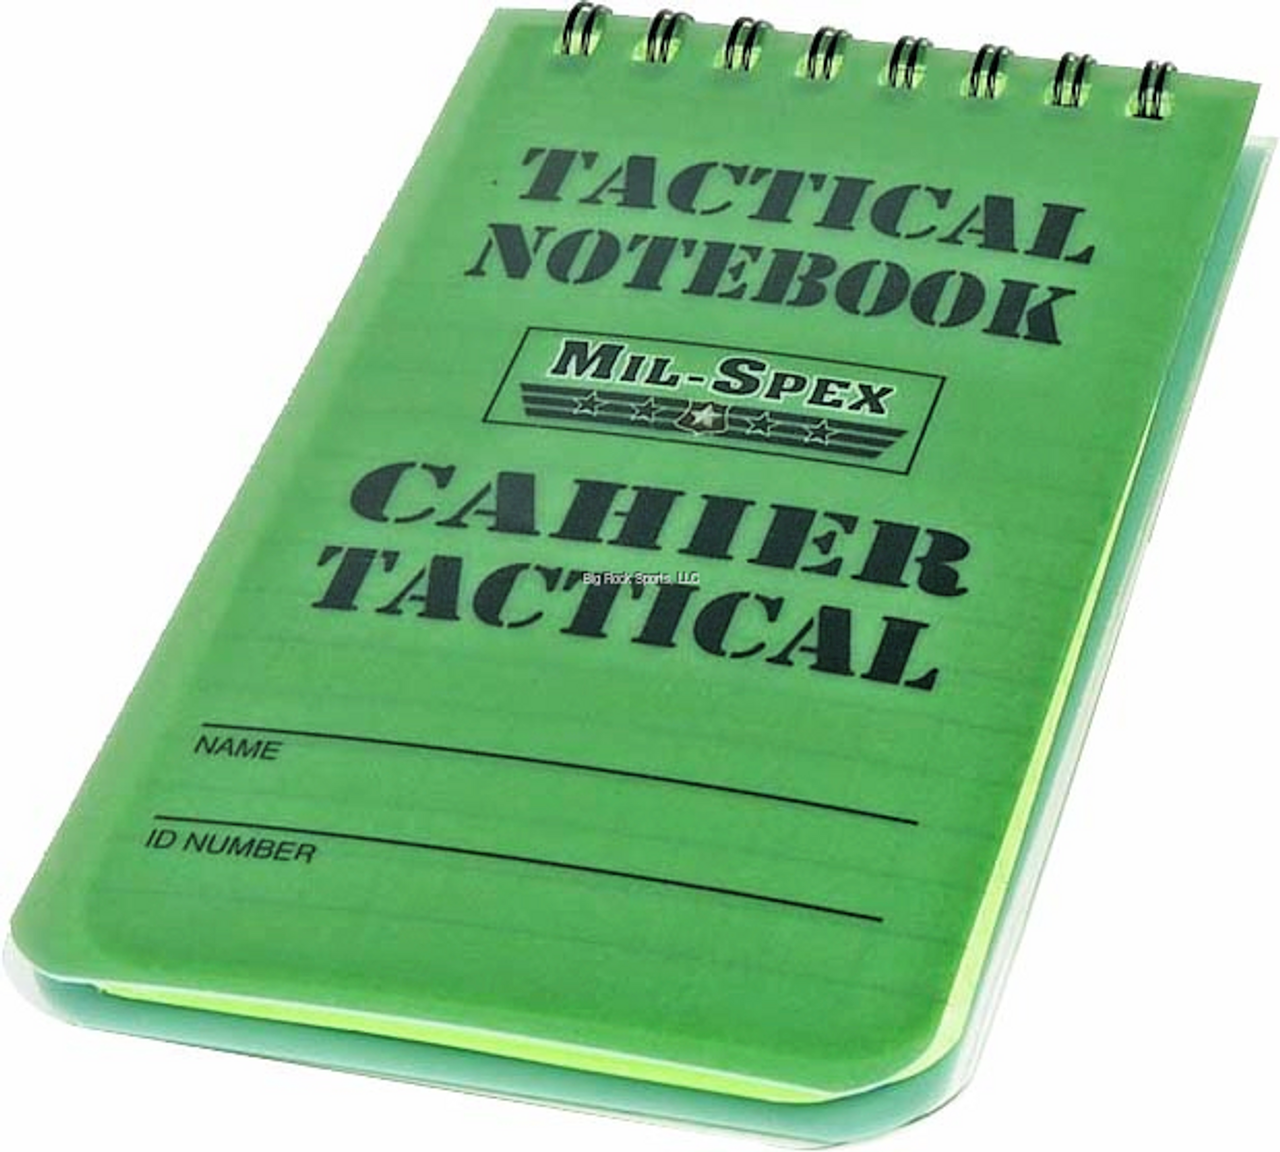 Mil-Spex Tactical Notebook, 3"x 5" Hard Plastic Cover, 50 Lined Pages